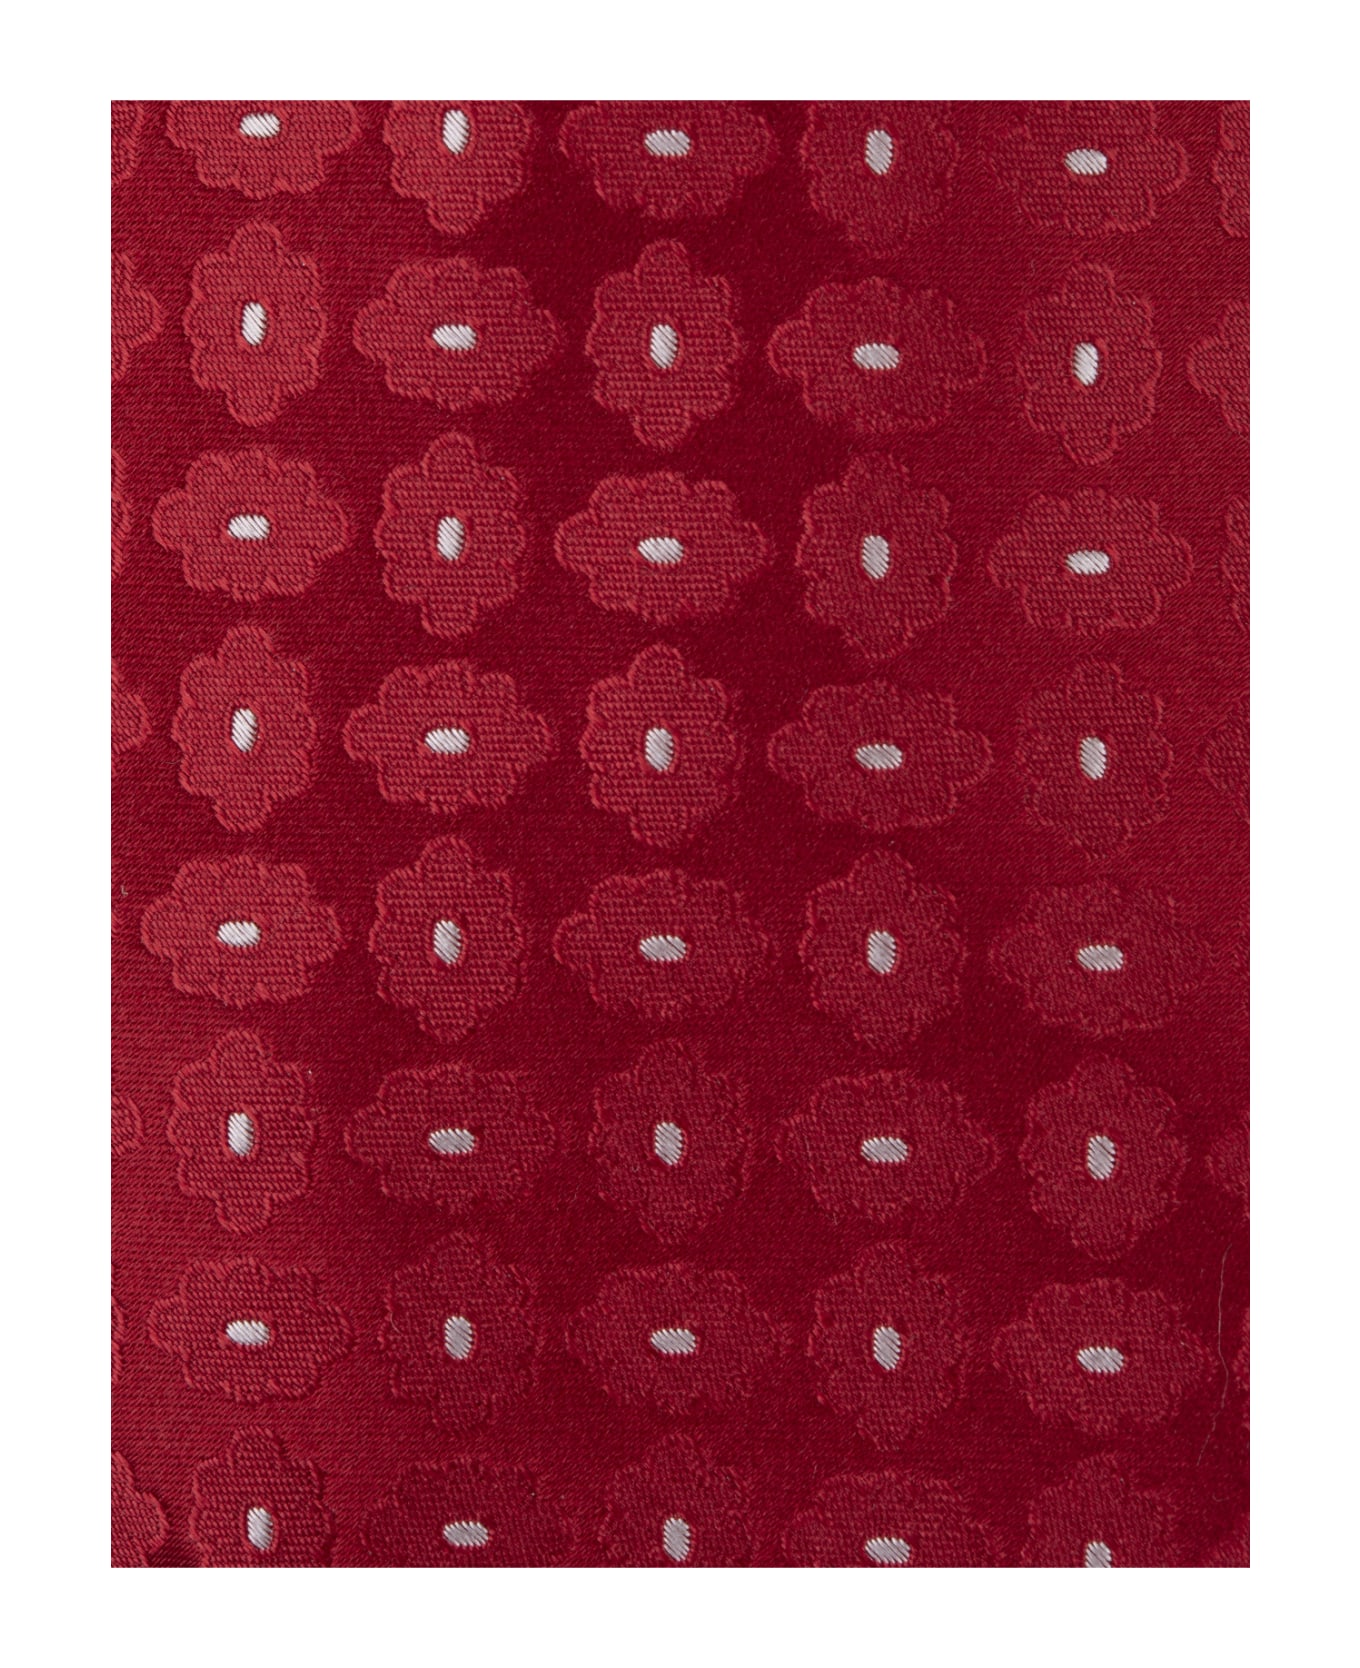 Kiton Red Tie With Floral Pattern - Red